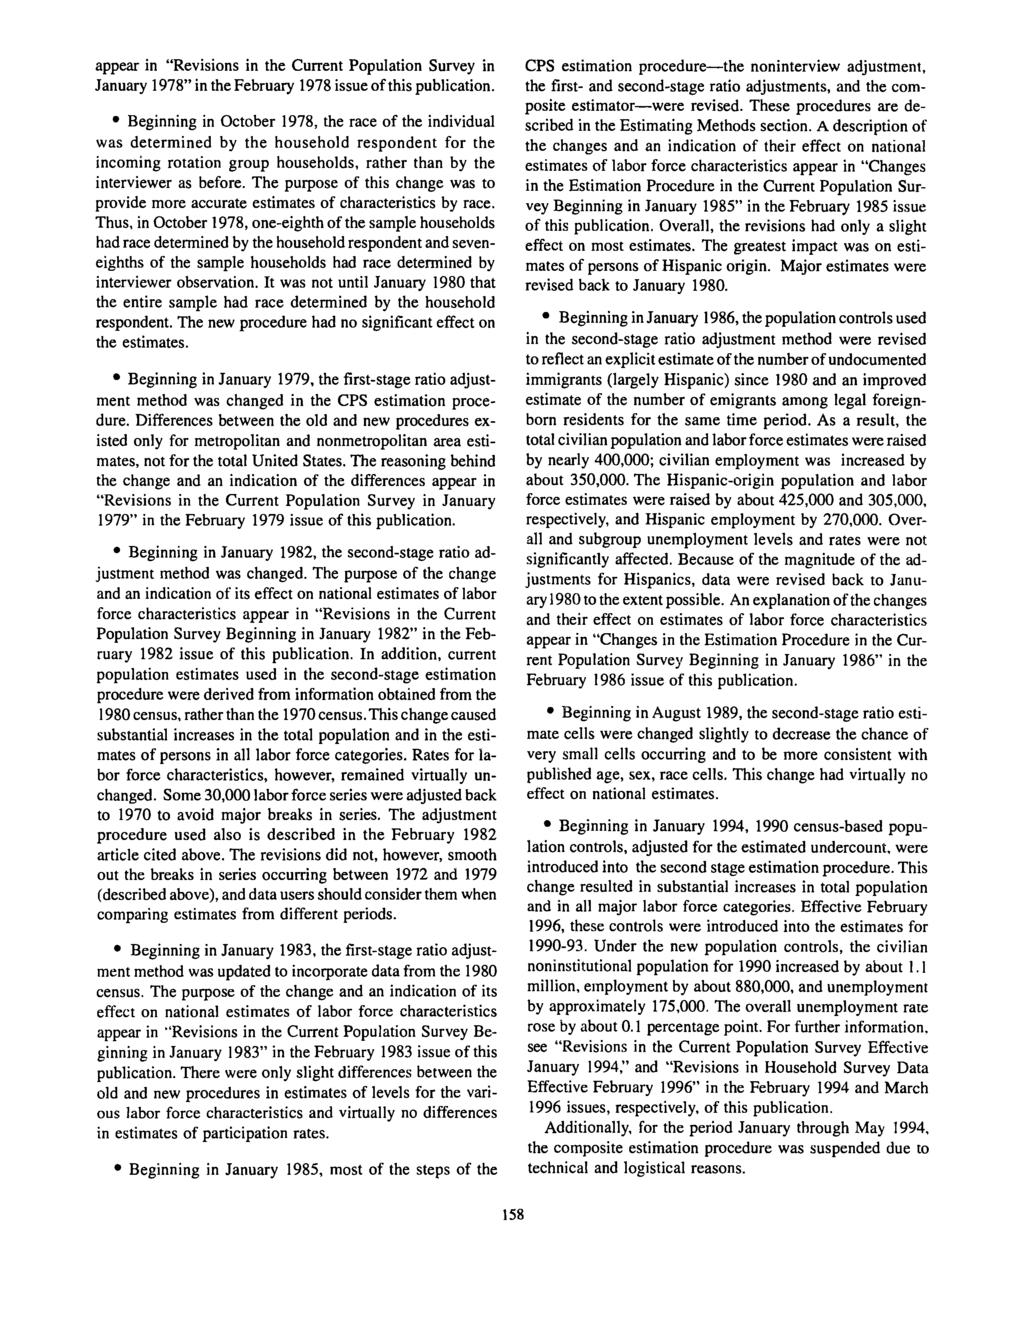 appear in "Revisions in the Current Population Survey in January 978" in the February 978 issue of this publication.